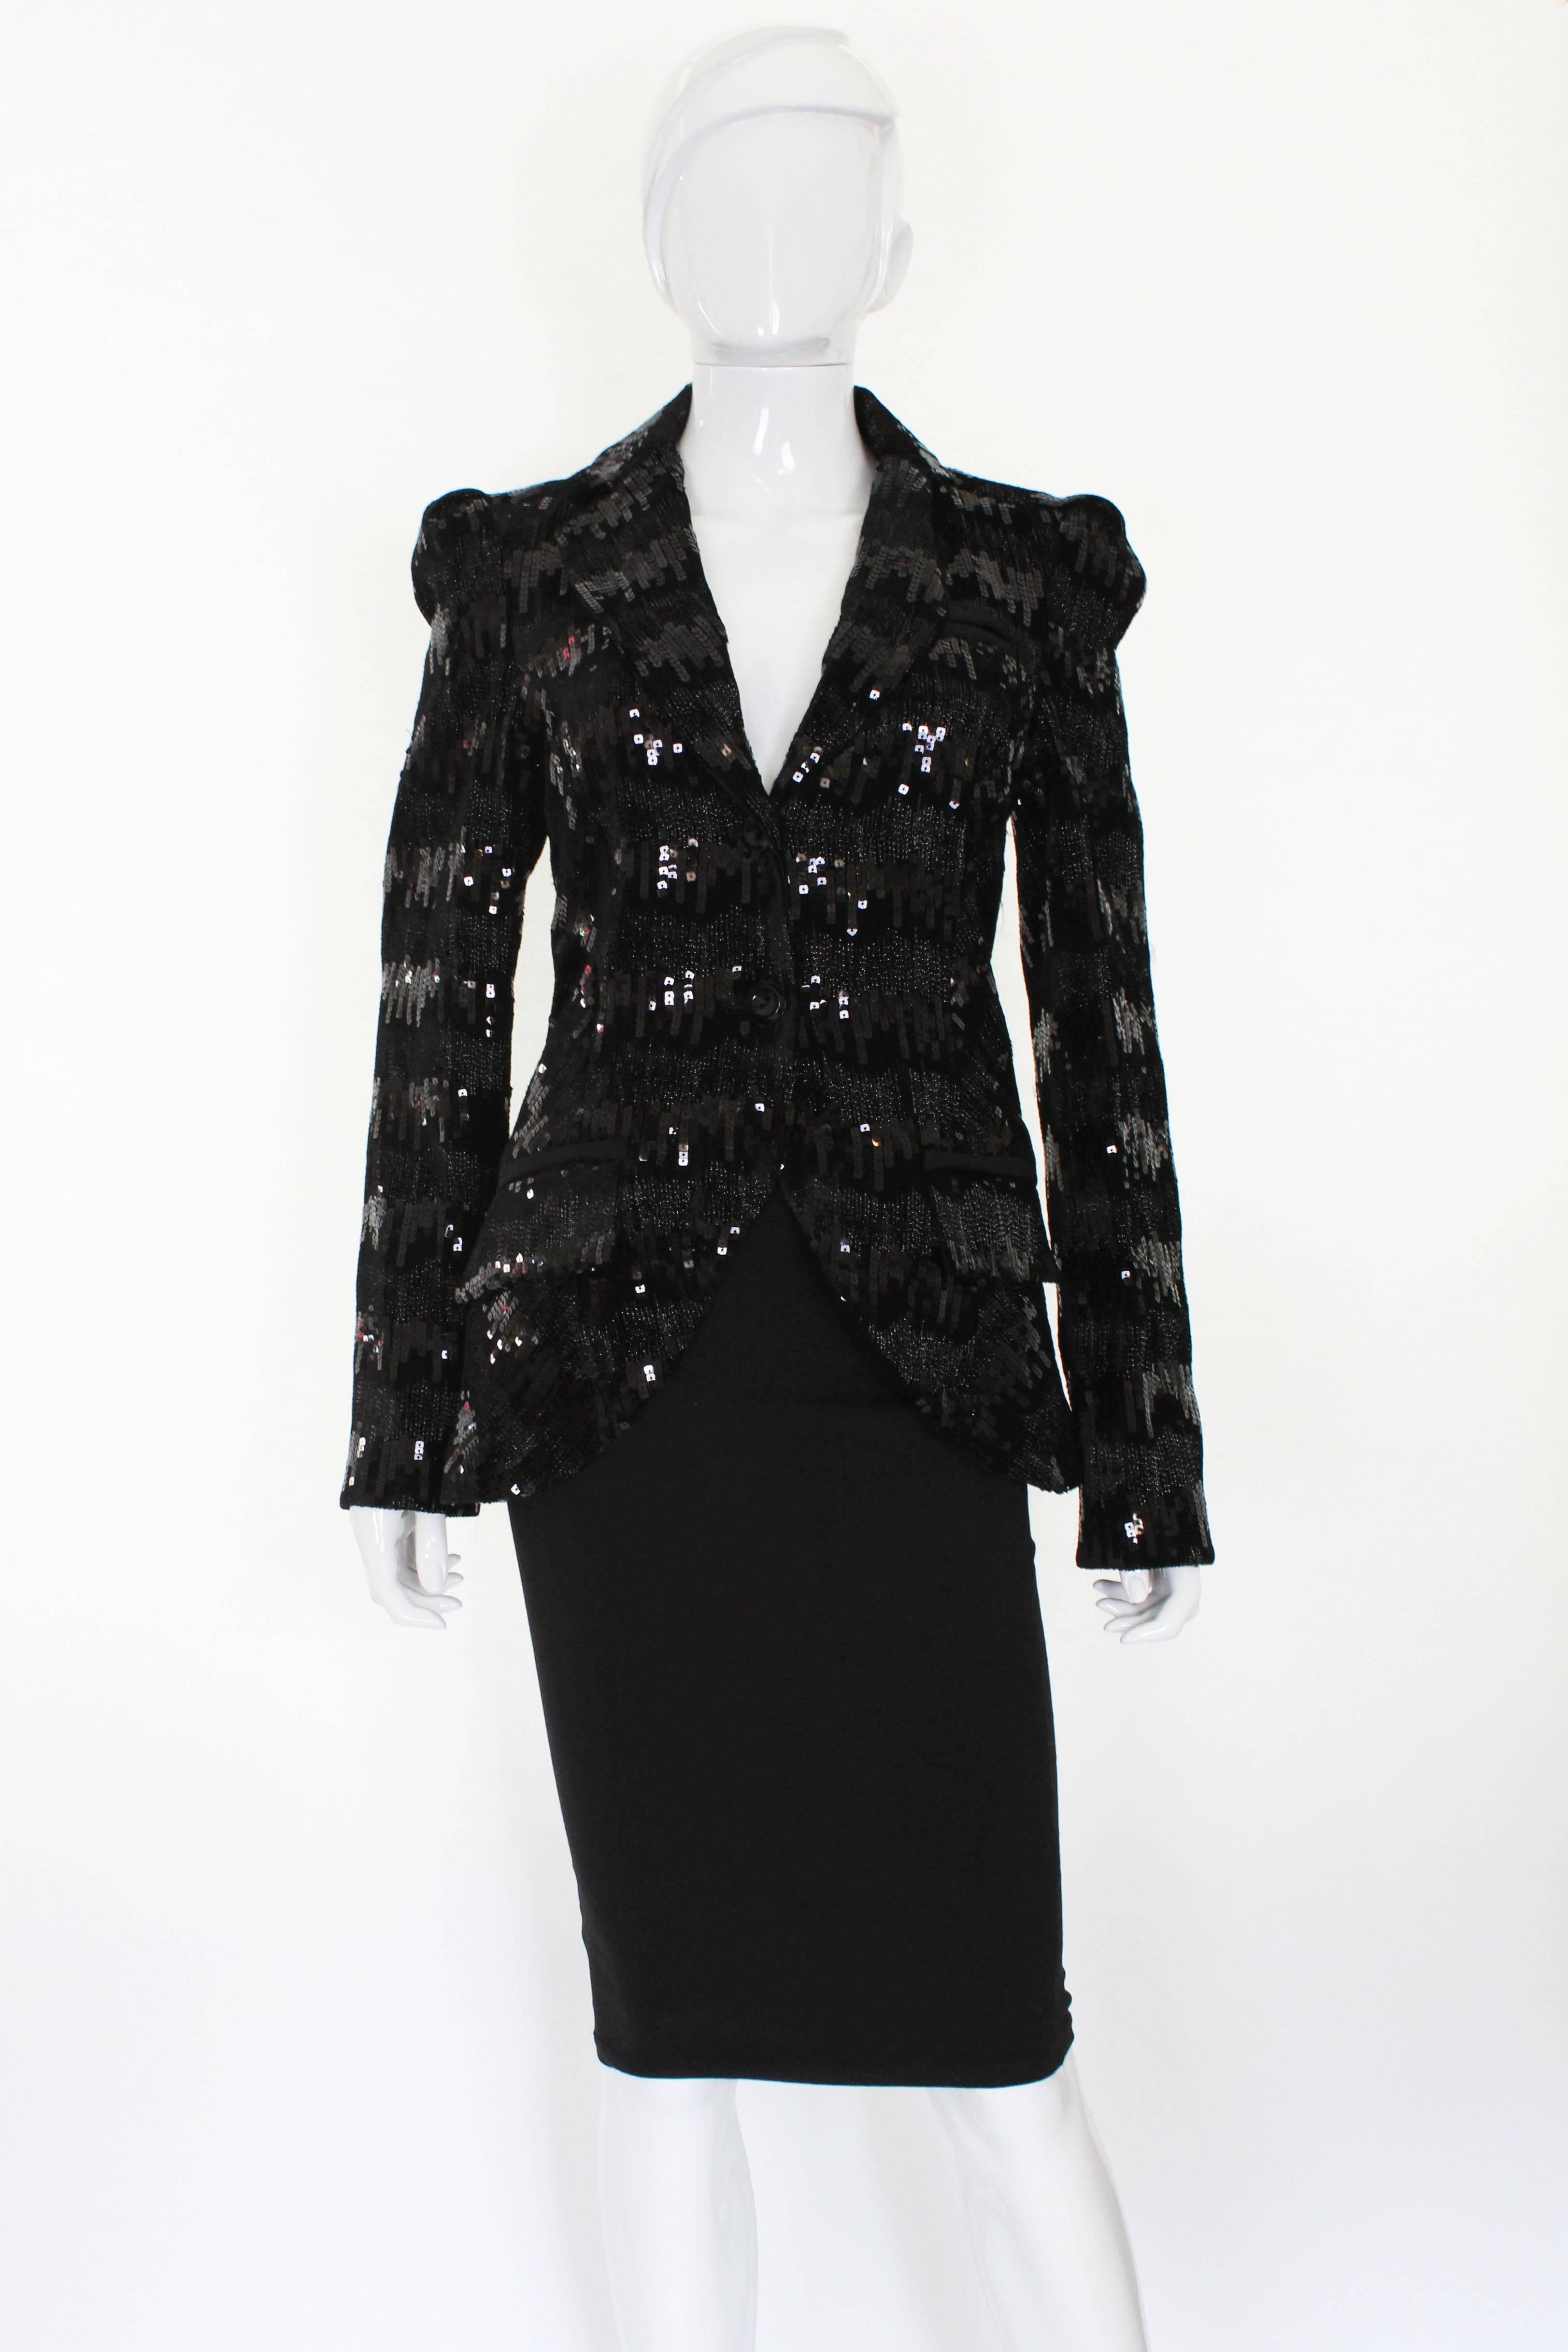 A great jacket by American designer , Diane von Furstenberg.The jacket has bands of sequins on a chenille background. The jacket is lined in silk. There is a fake breast pocket on the left hand side and two fake pockets at hip leval.
There is a 